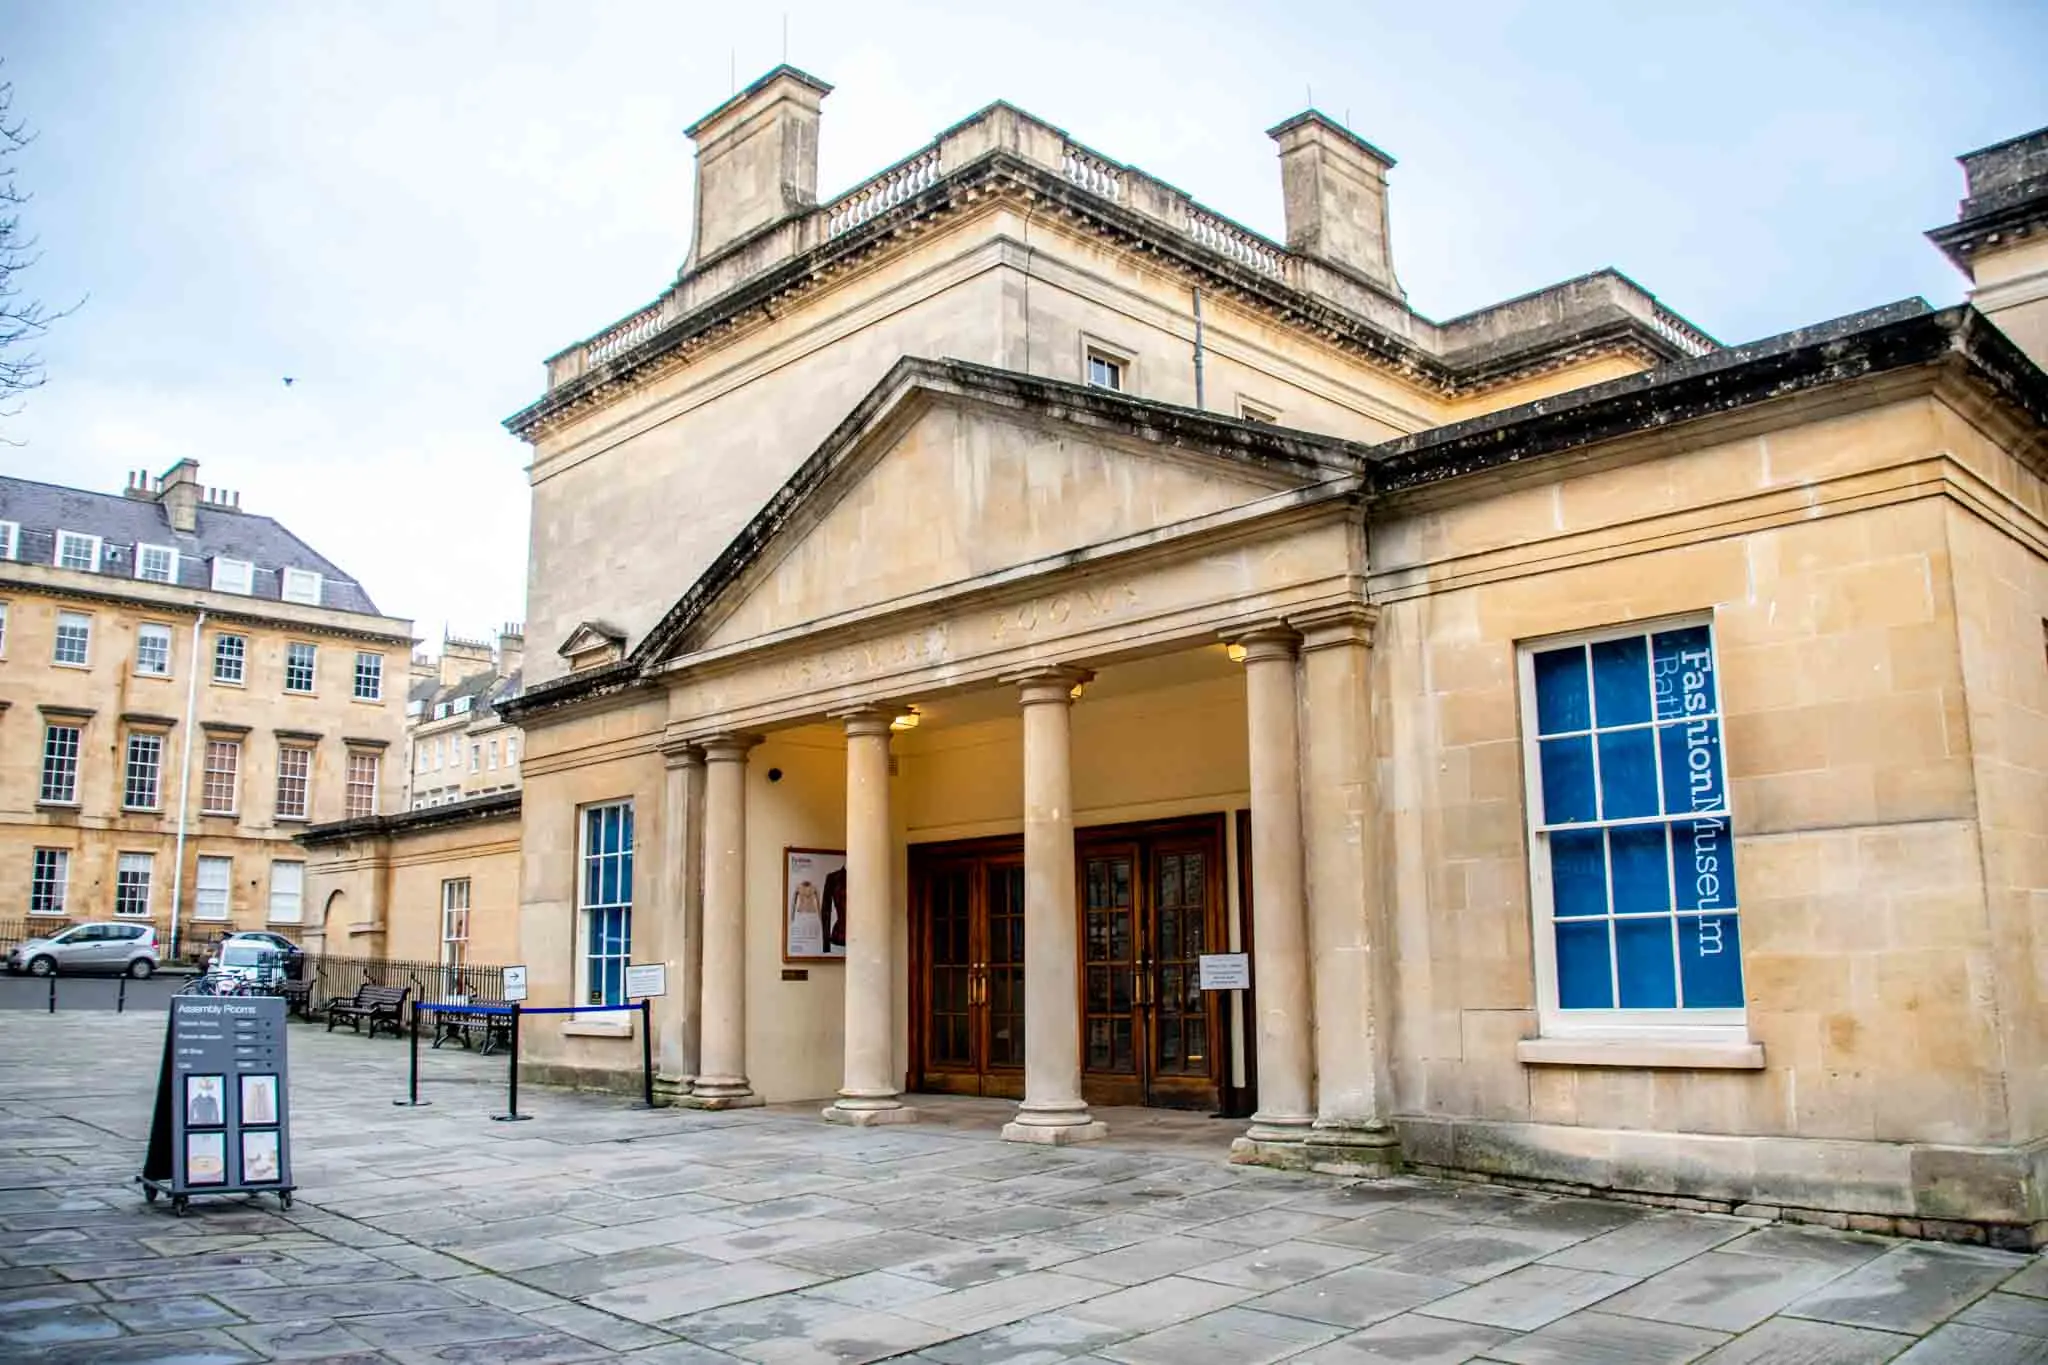 Yellow exterior of the Bath Assembly Rooms, the home of the Fashion Museum